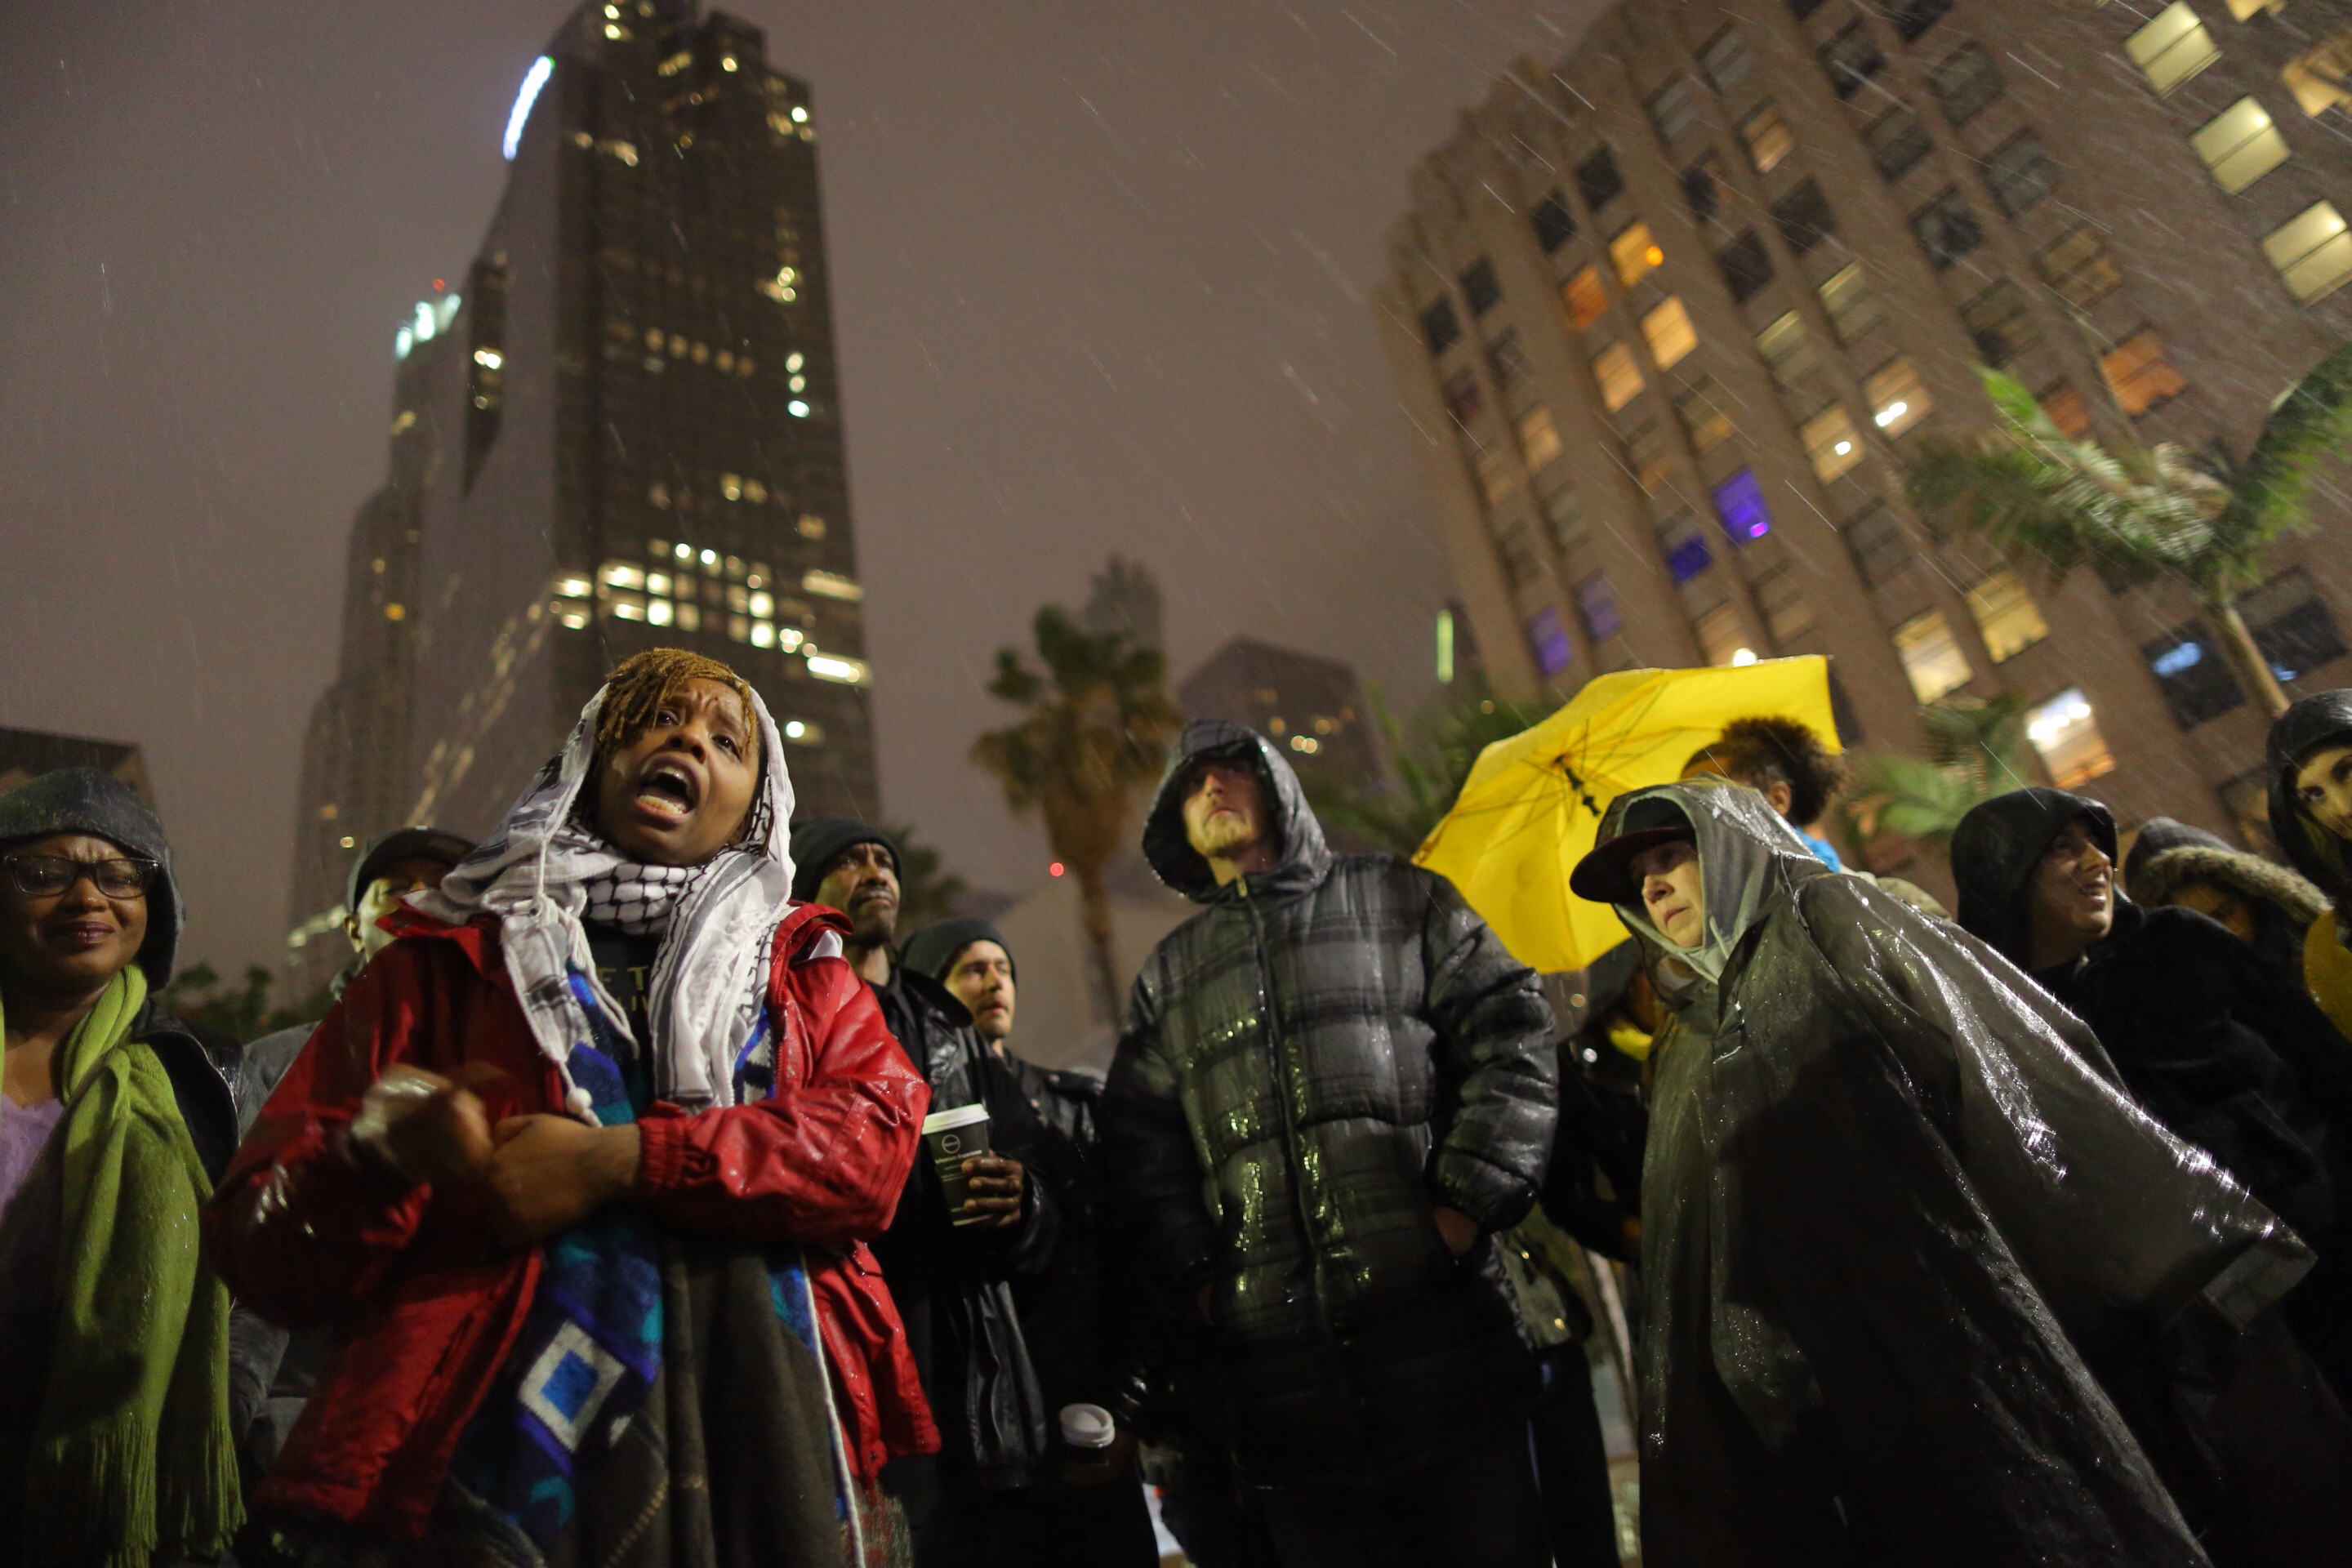 Patrisse Cullors speaks to the people gathered at Pershing Square in Los Angeles to protest a homeless man who was shot during a confrontation downtown by the LAPD, March 1, 2015 (Marcus Yam—LA Times via Getty Images)